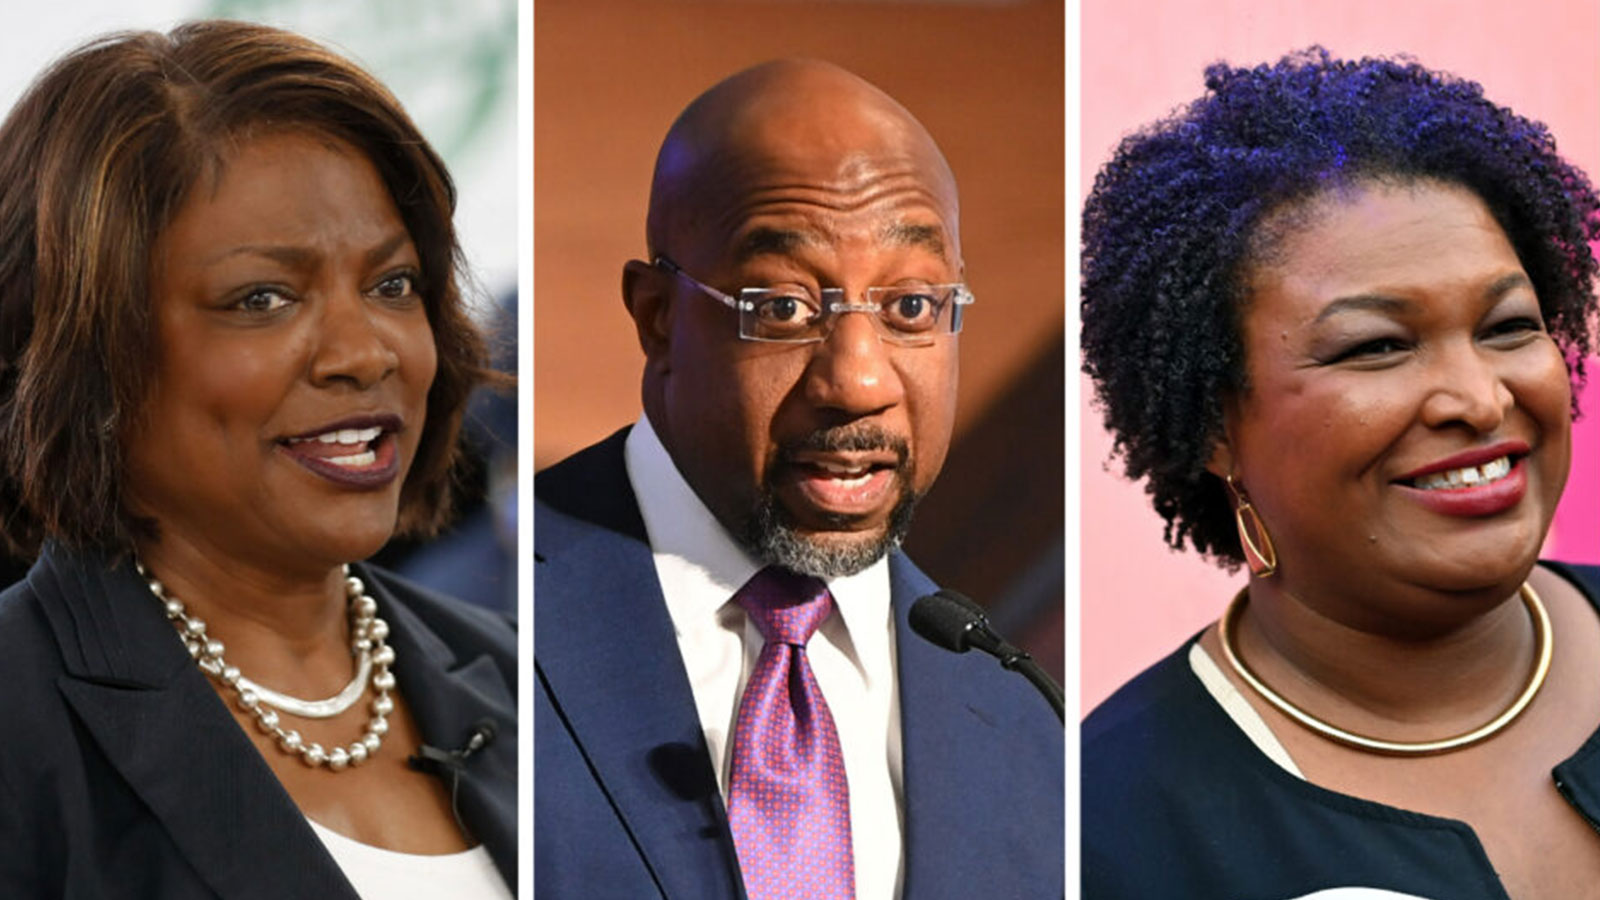 Midterm elections weeks away, record number of Black candidates running for office — here’s what you need to know